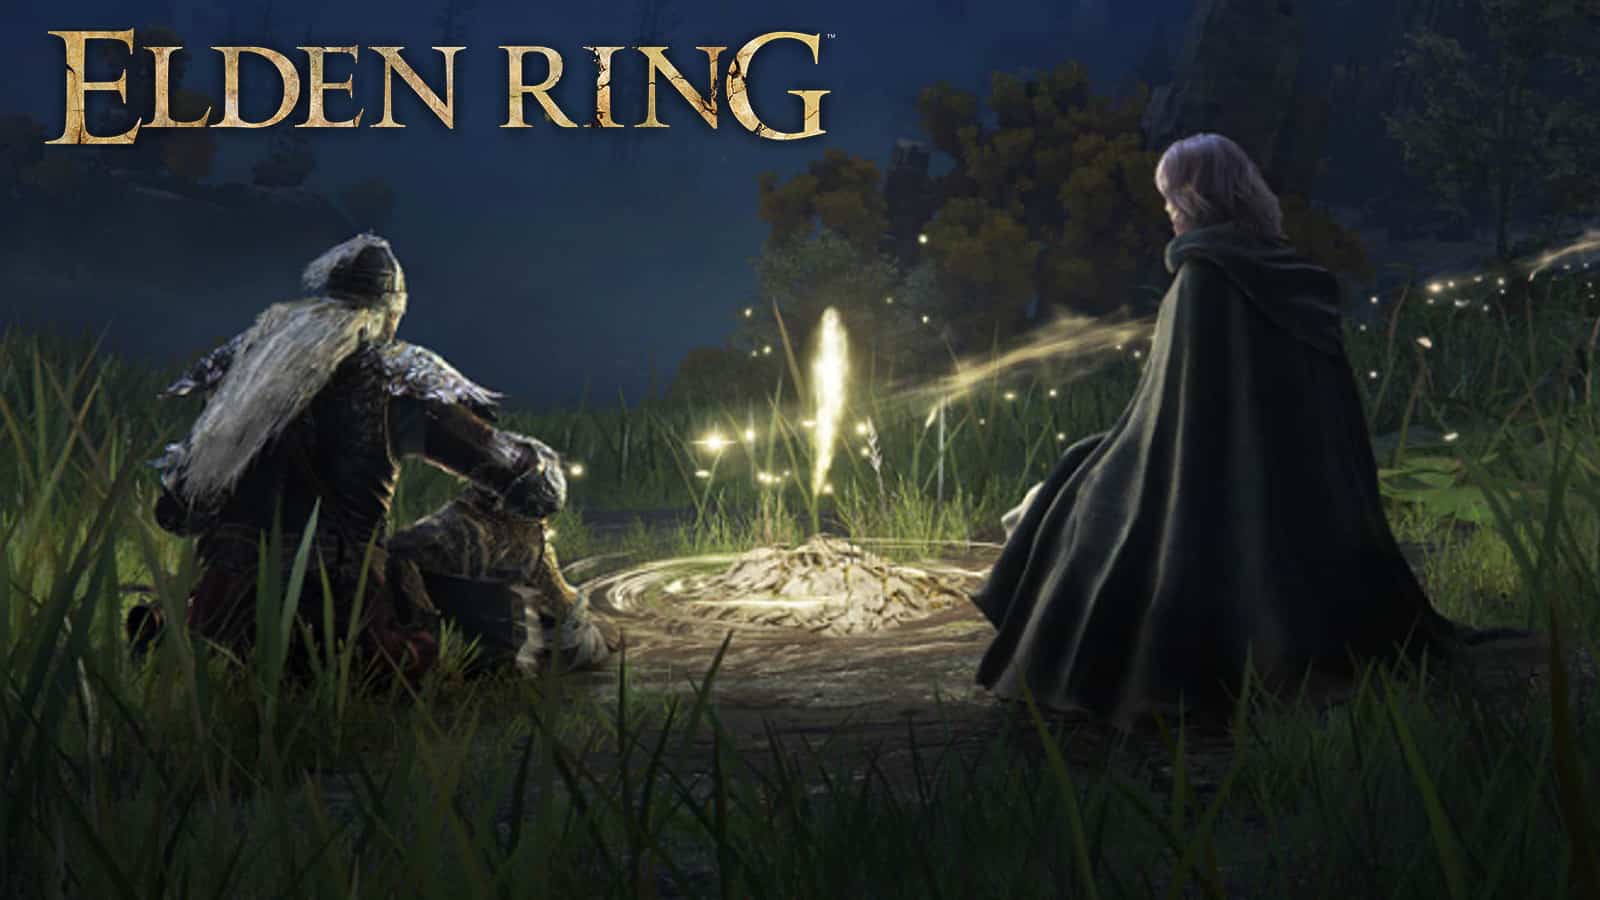 Elden Ring characters sat together